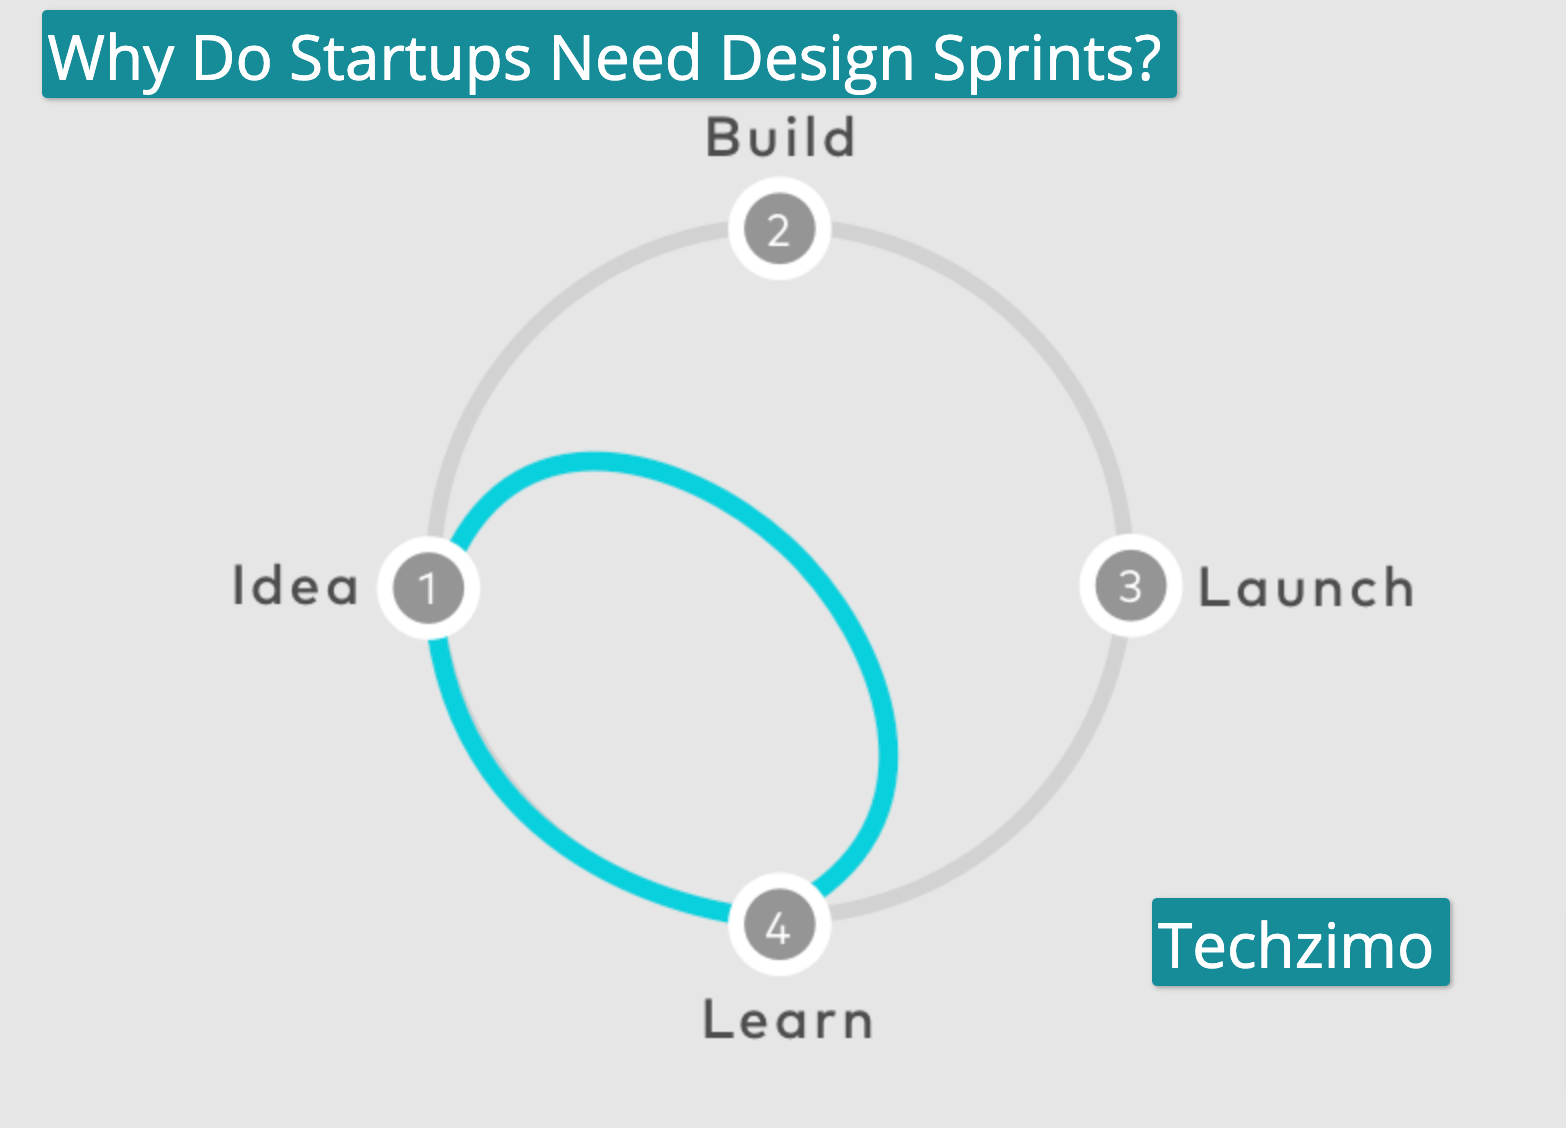 Why Do Startups Need Design Sprints?